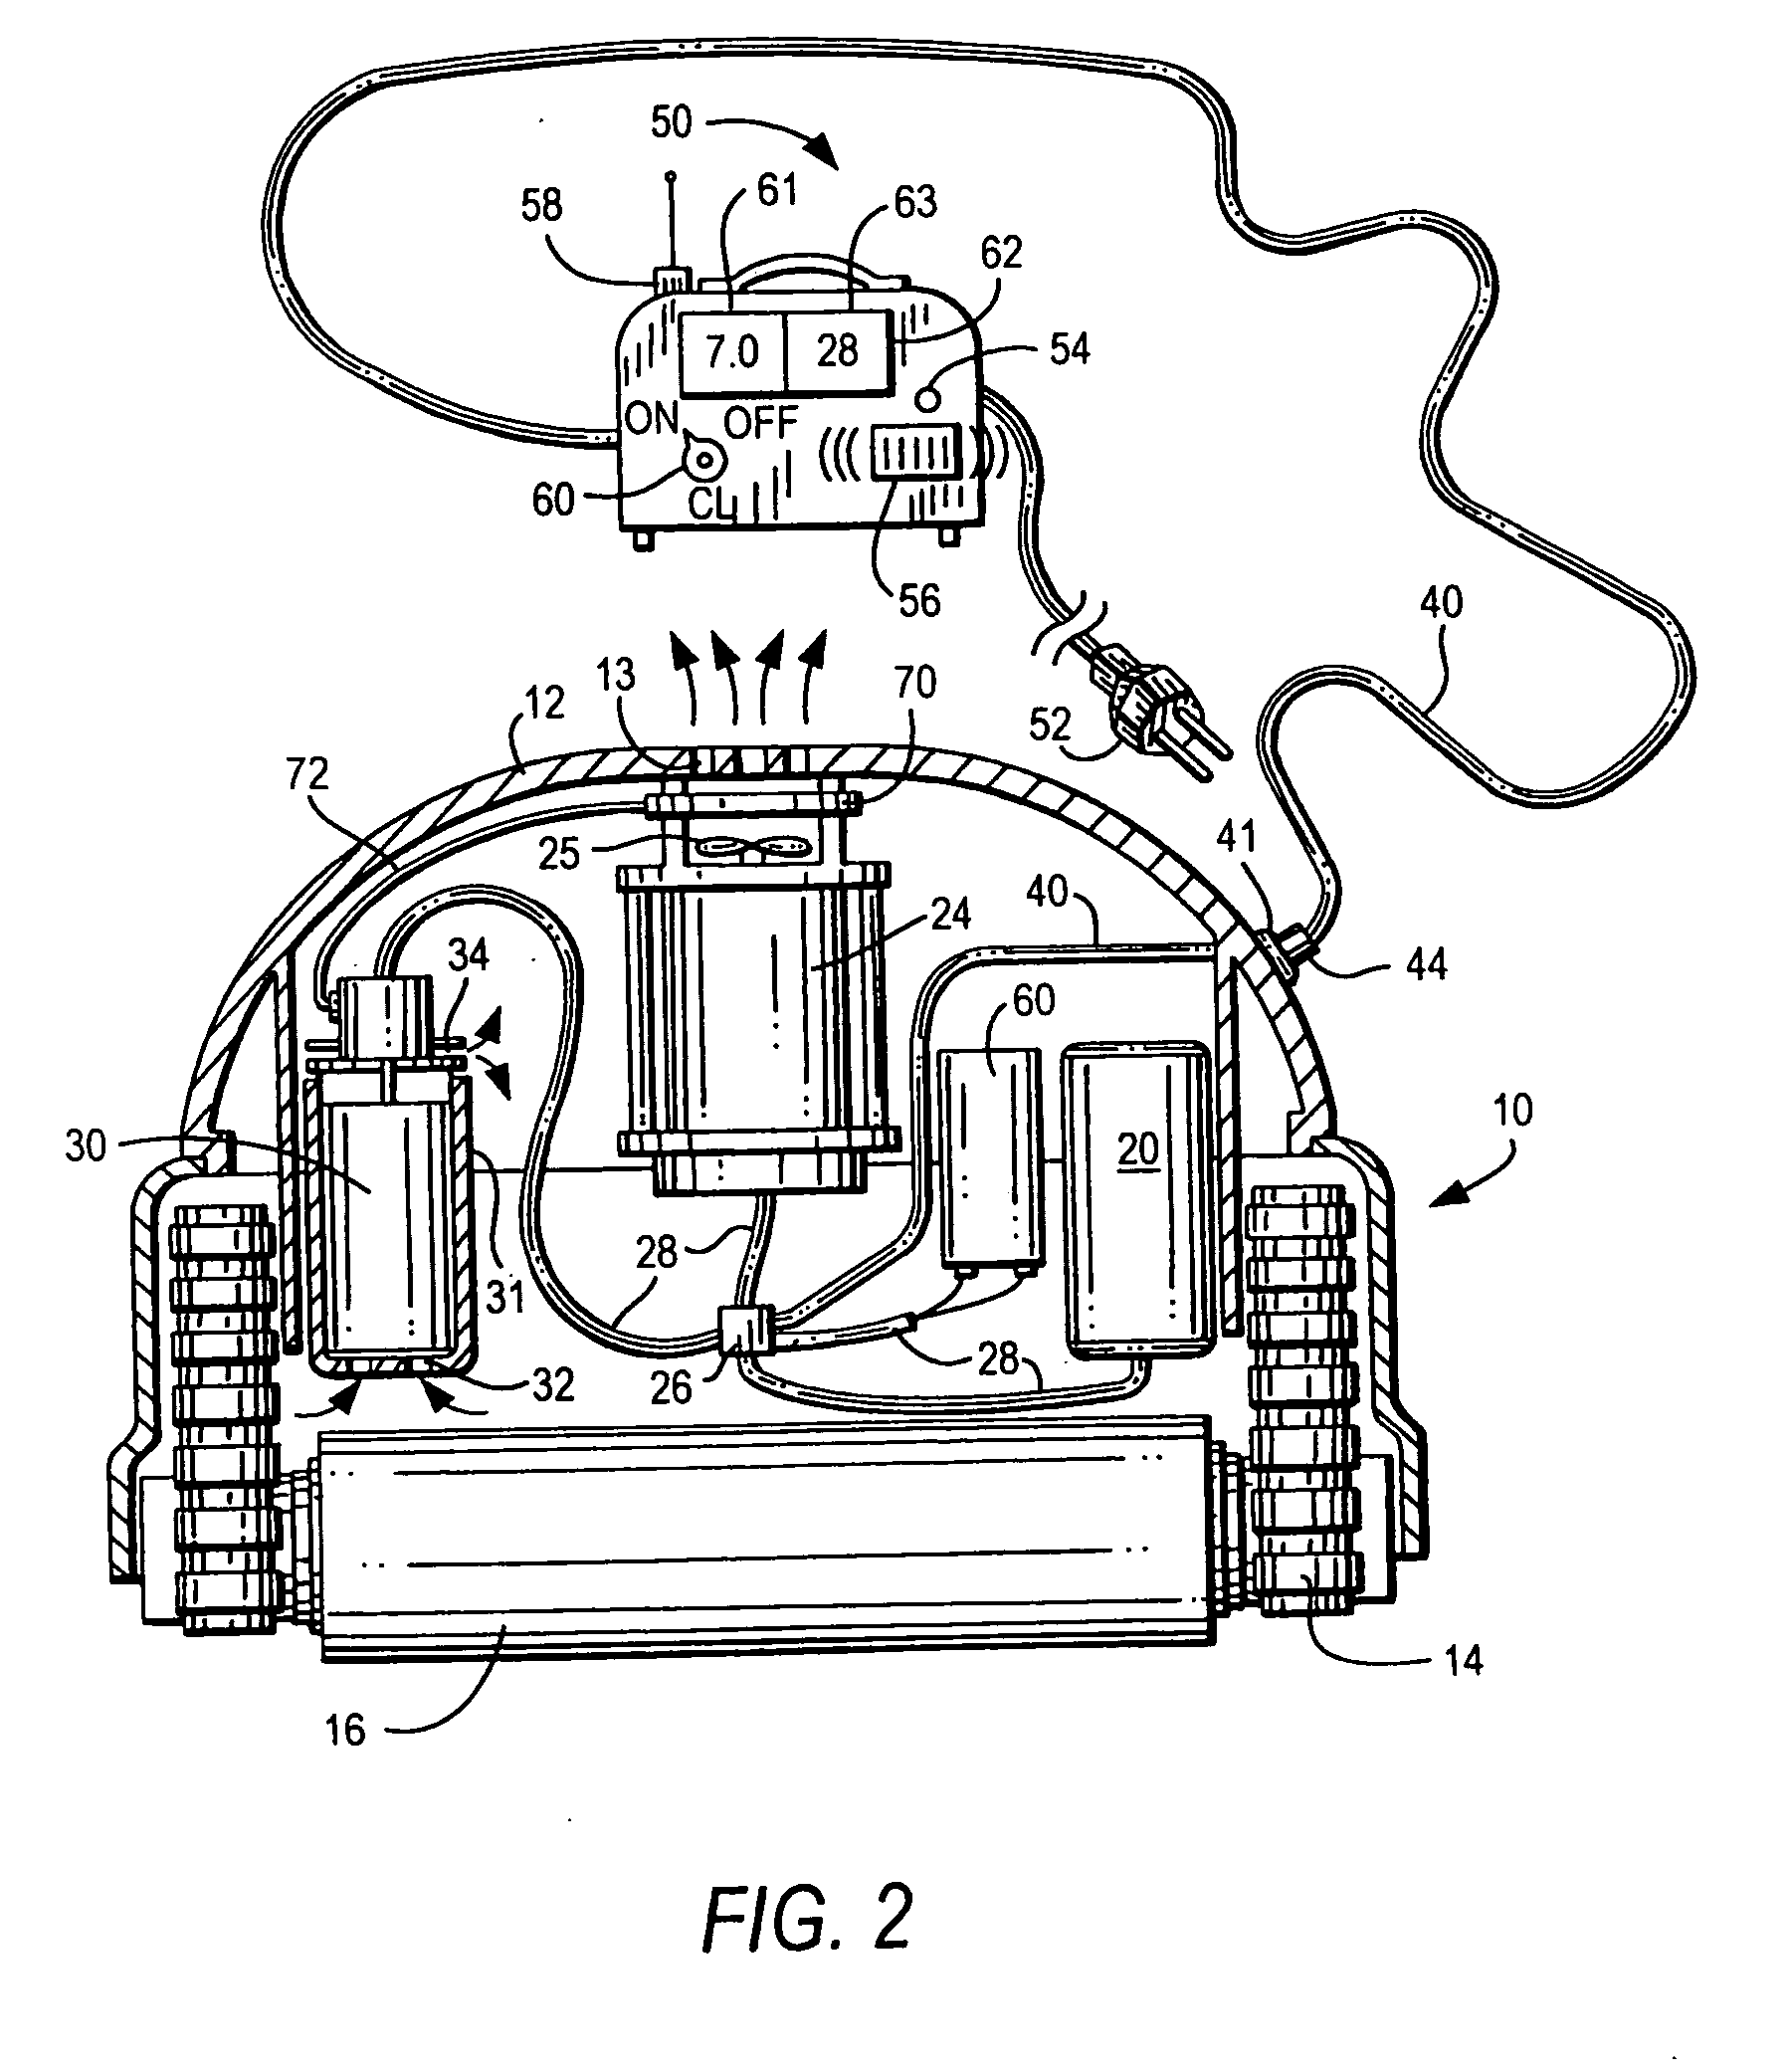 Method and appartus for operation of pool cleaner with integral chlorine generator